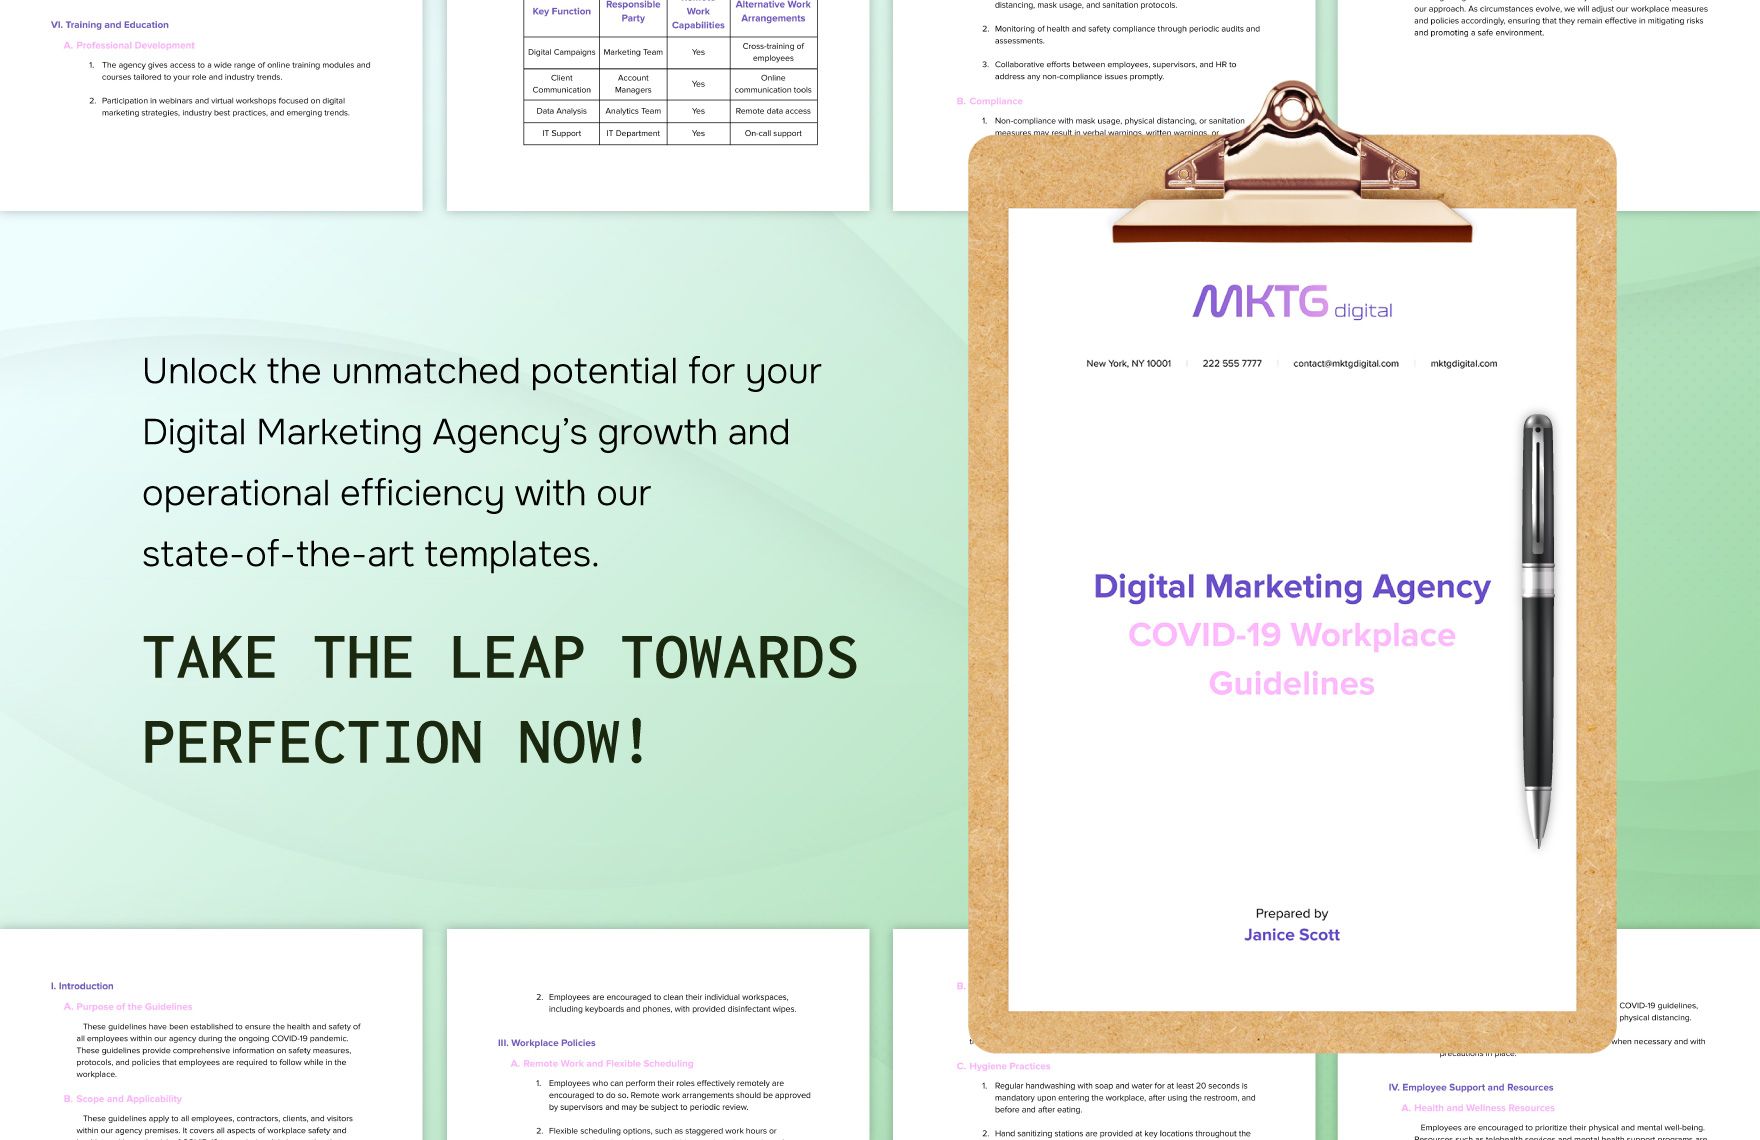 Digital Marketing Agency COVID-19 Workplace Guidelines Template